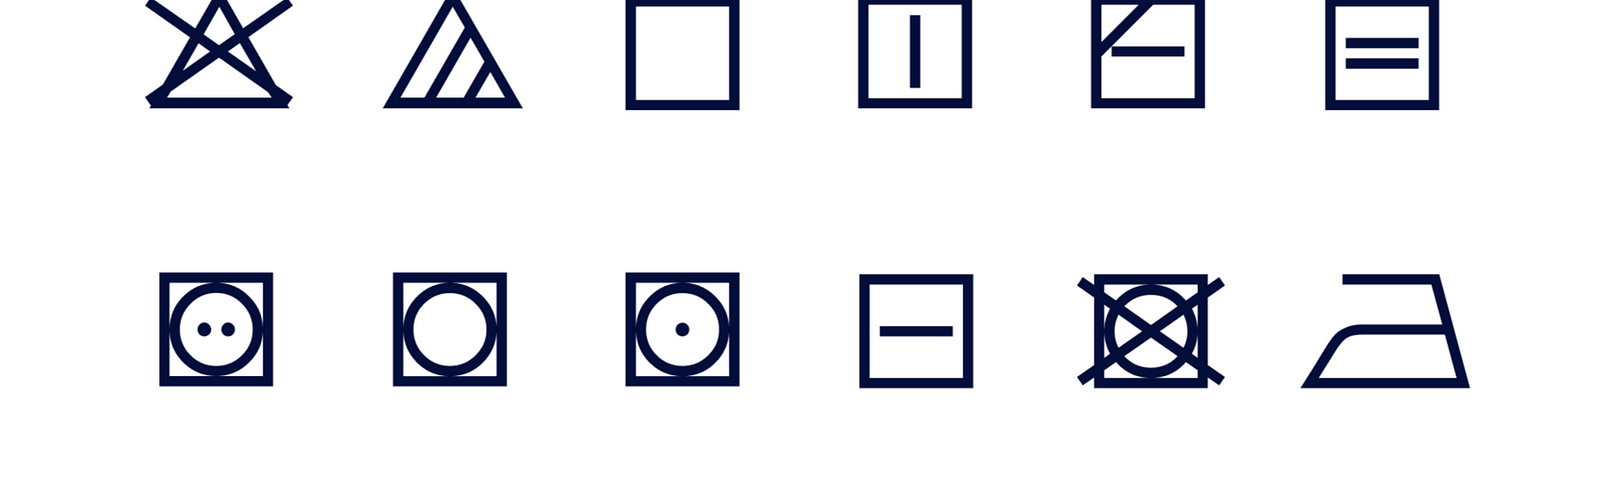 The current laundry symbols/icons designed by GINETEX